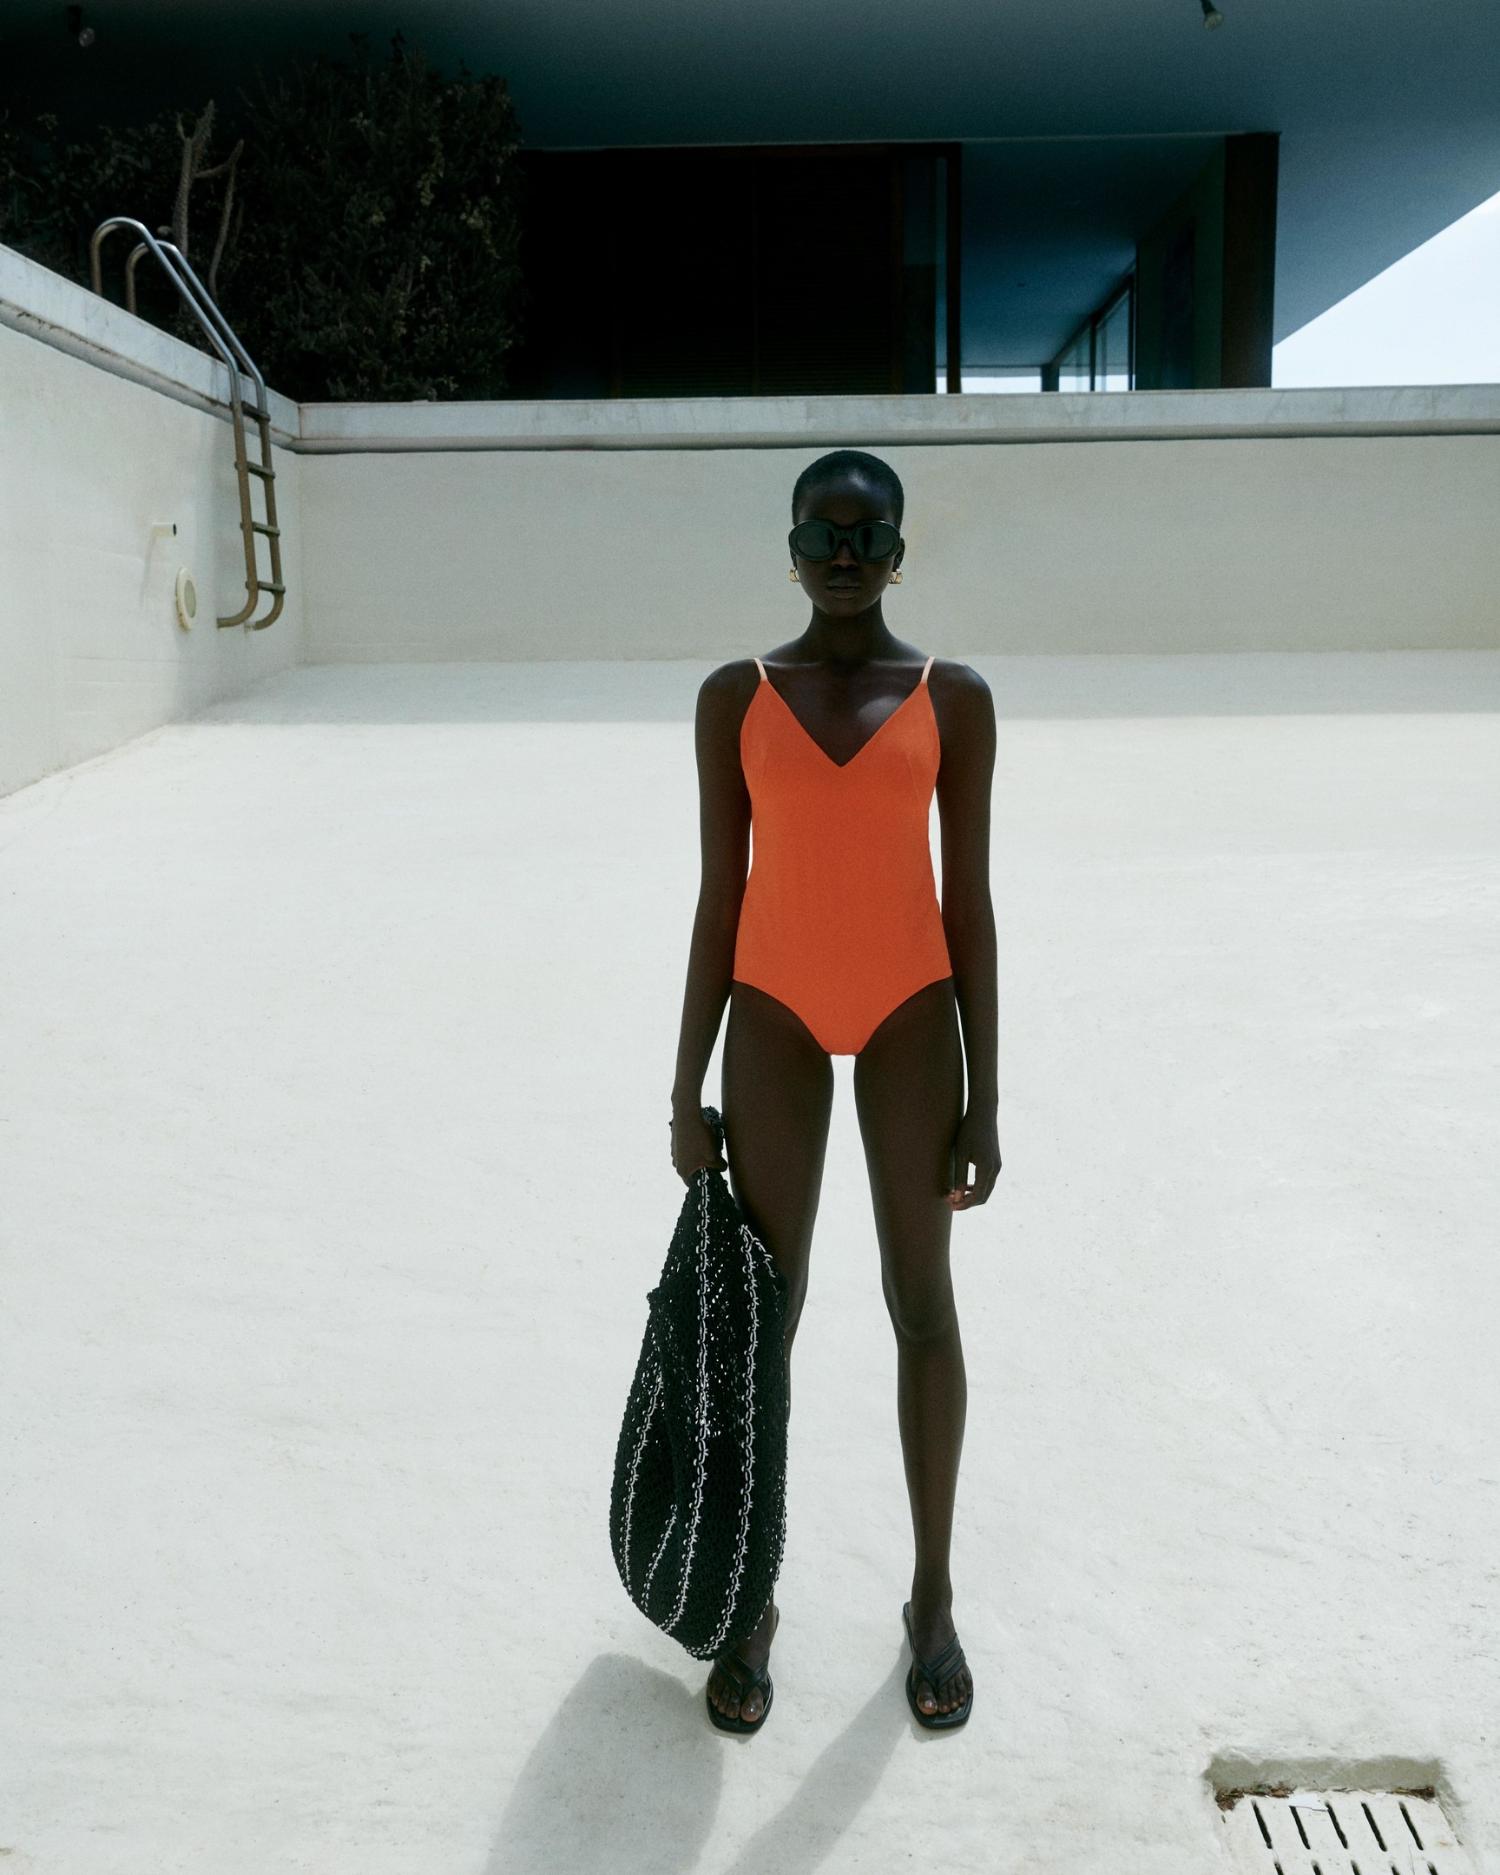 Ajok Madel by Robin Galiegue for COS Summer 2021 Ad Campaign. Clothing & Accessories: COS ORANGE DRAWSTRING SWIMSUIT / COS BLACK CROCHET SHOPPER BAG / COS BLACK LEATHER FLIP FLOPS